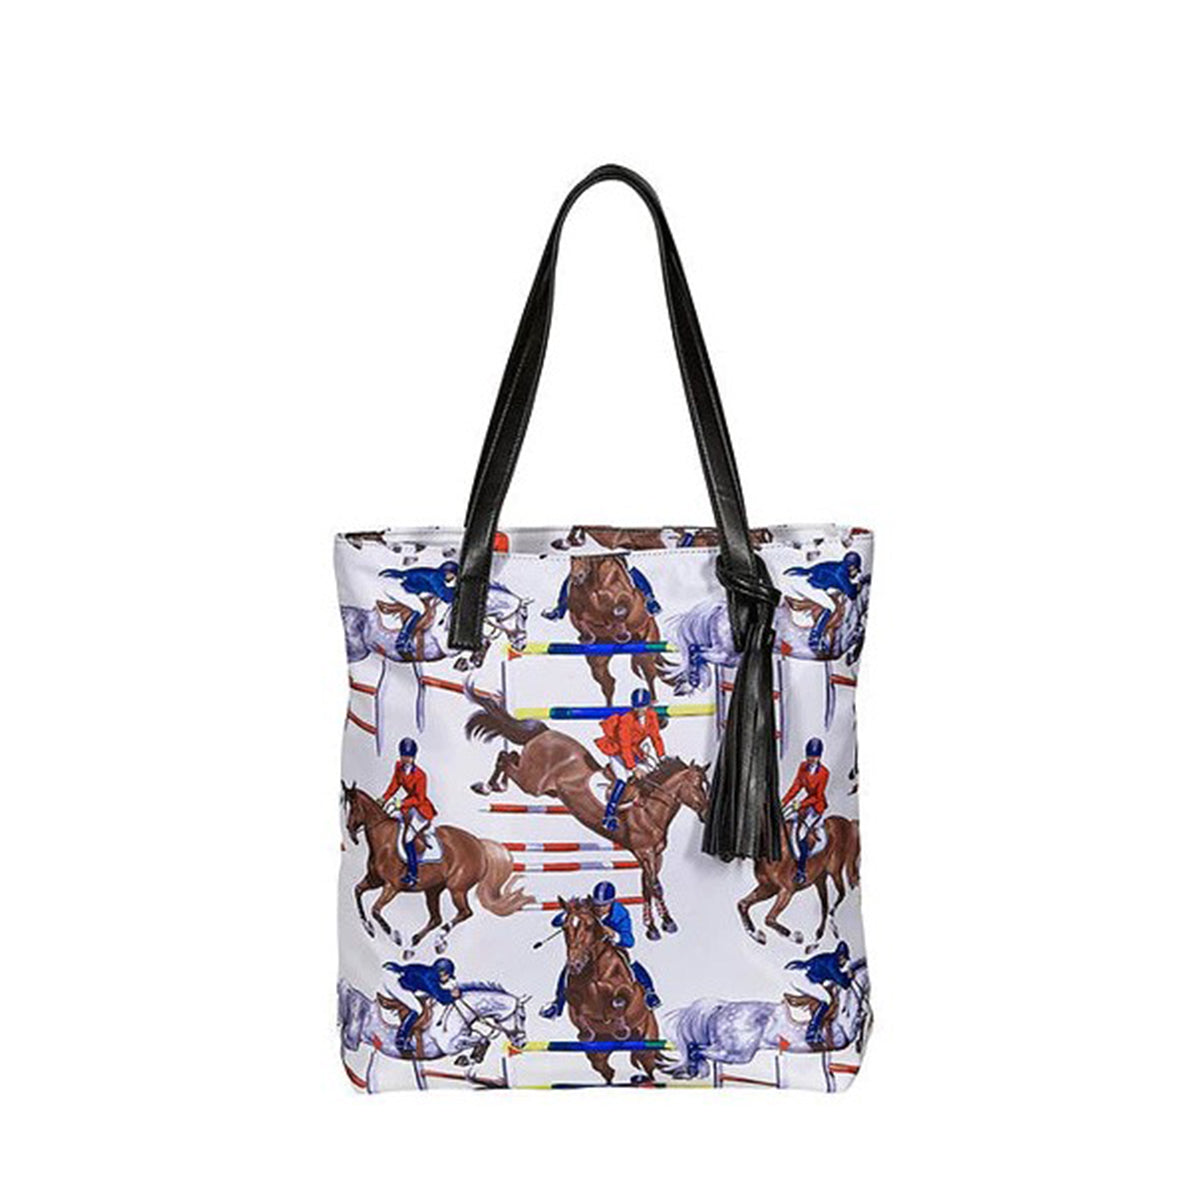 AWST Int'l "Lila" Tote Bag with Tassel